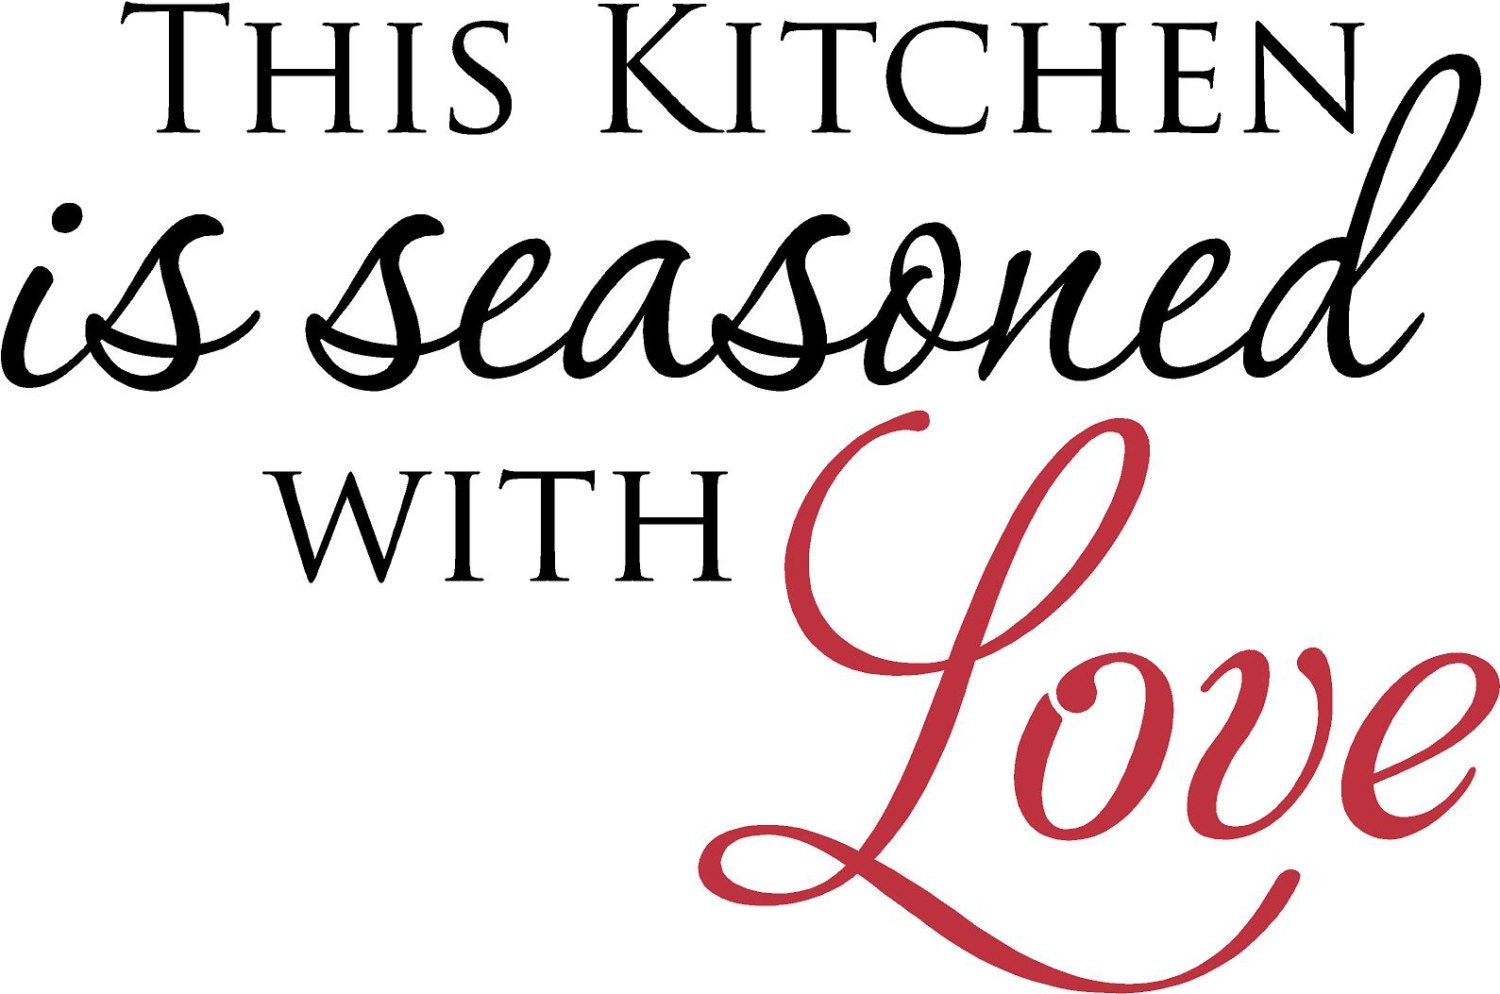 Download This Kitchen is seasoned with Love 22x14.5 Wall Decal Vinyl